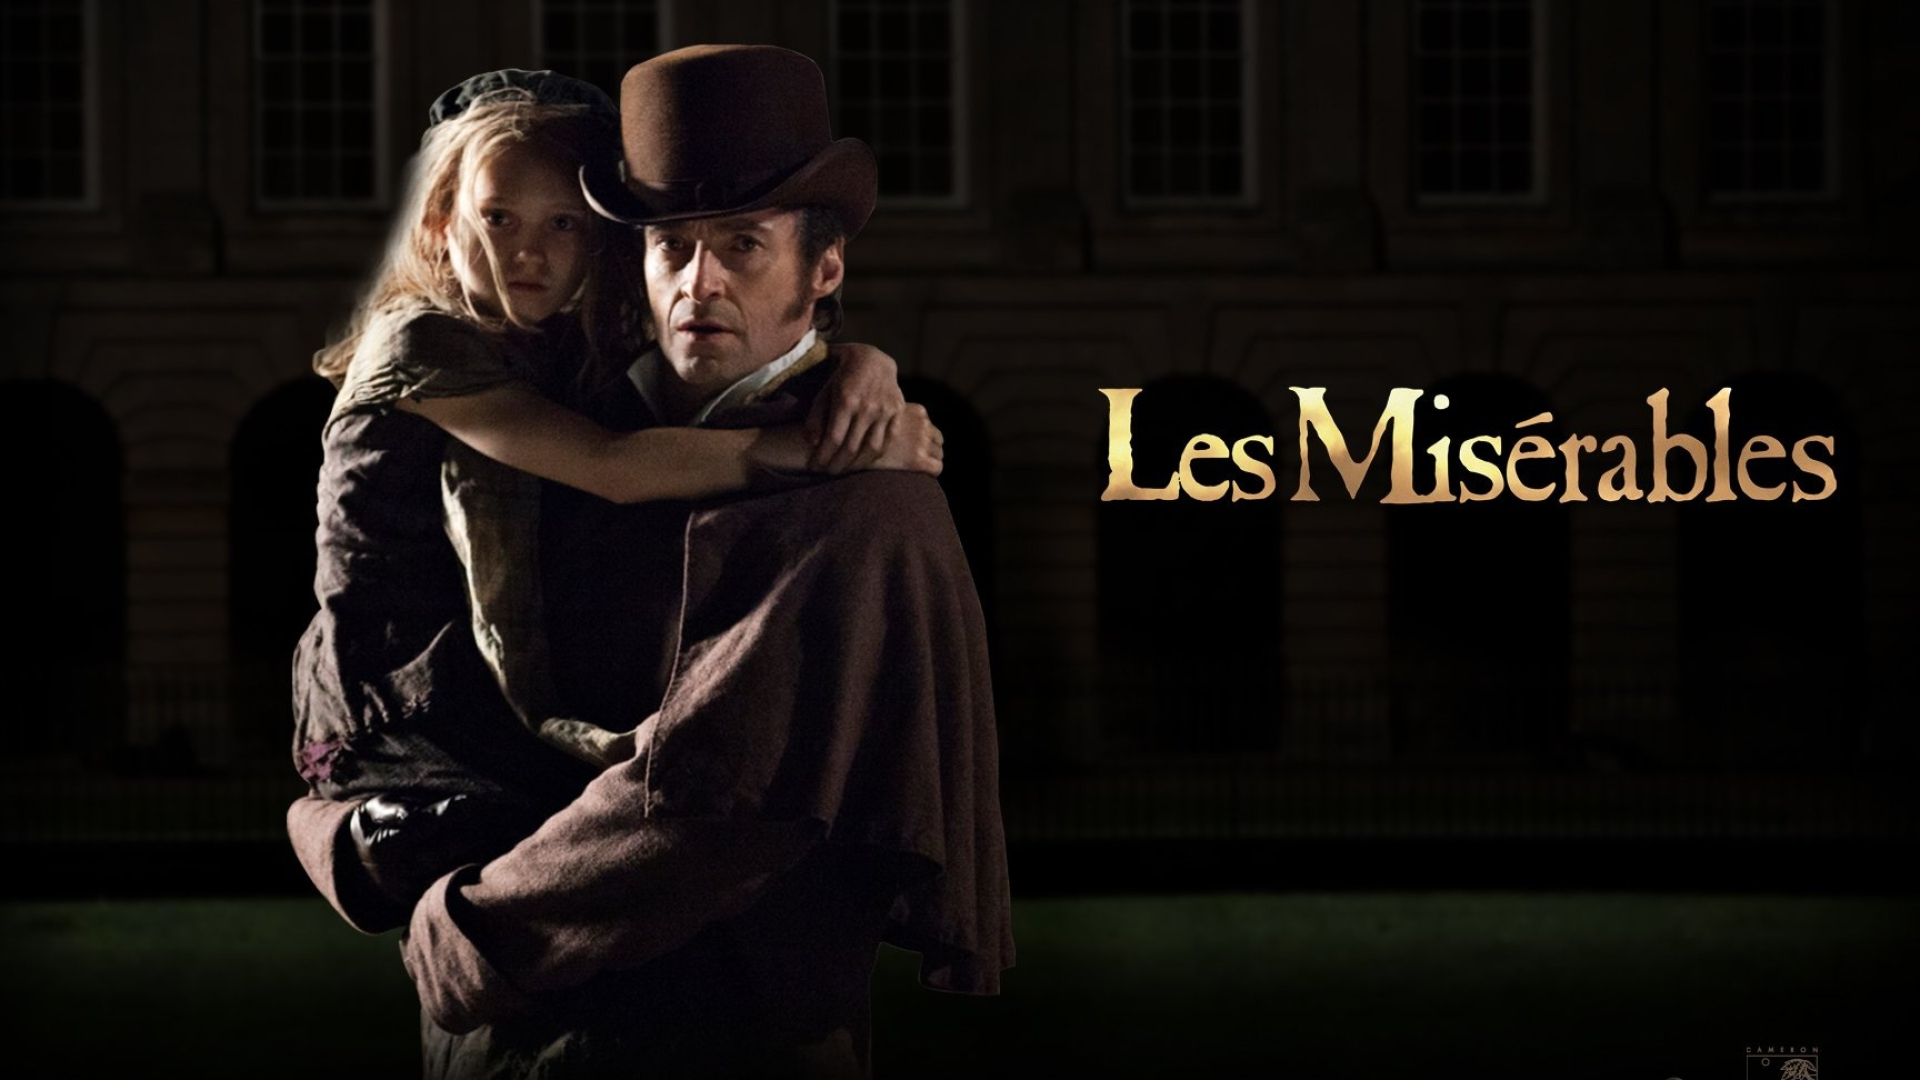 Les Miserables: Hugh Jackman as Jean Valjean and Isabelle Allen as Cosette. 1920x1080 Full HD Background.